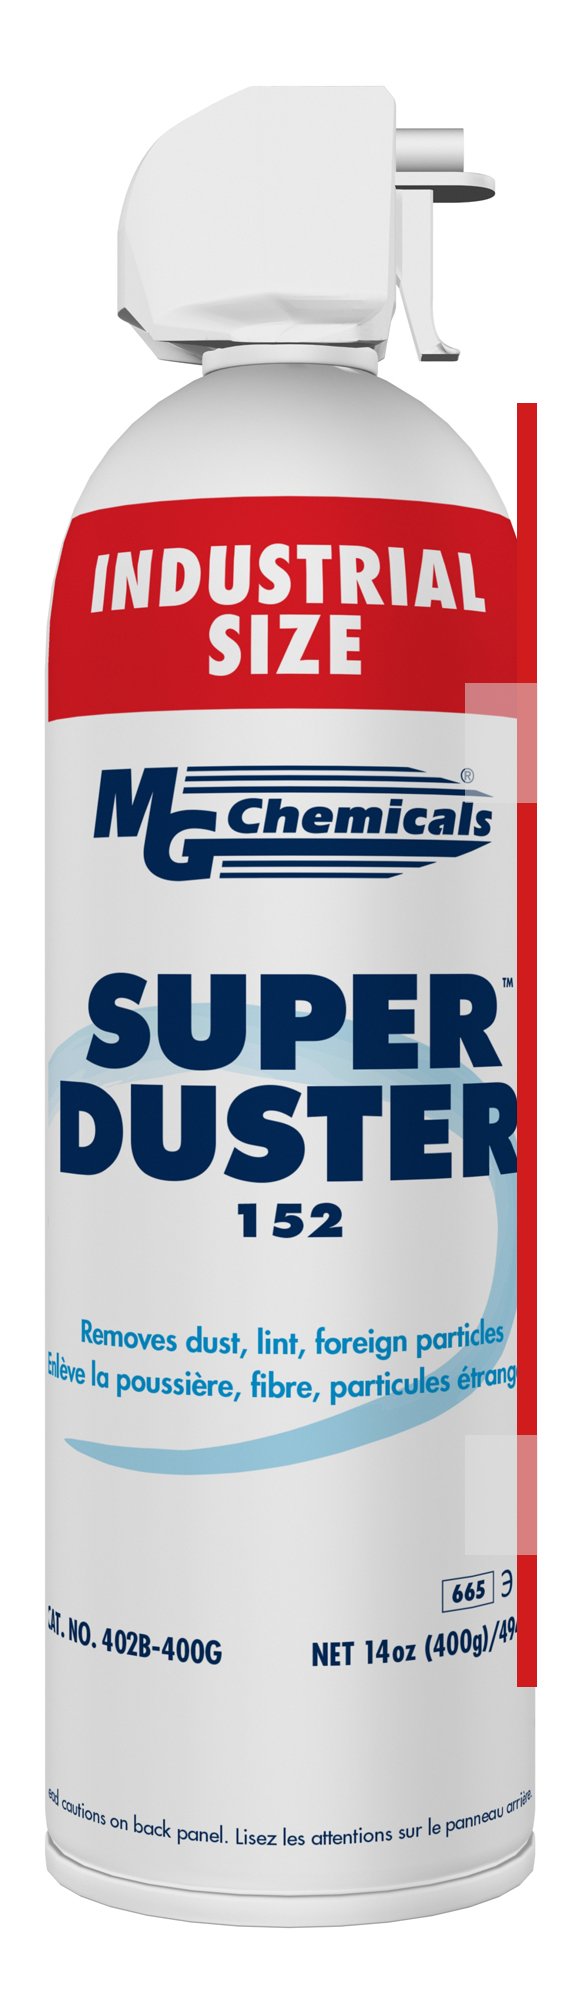 MG Chemicals Super Duster 152 (14 oz)